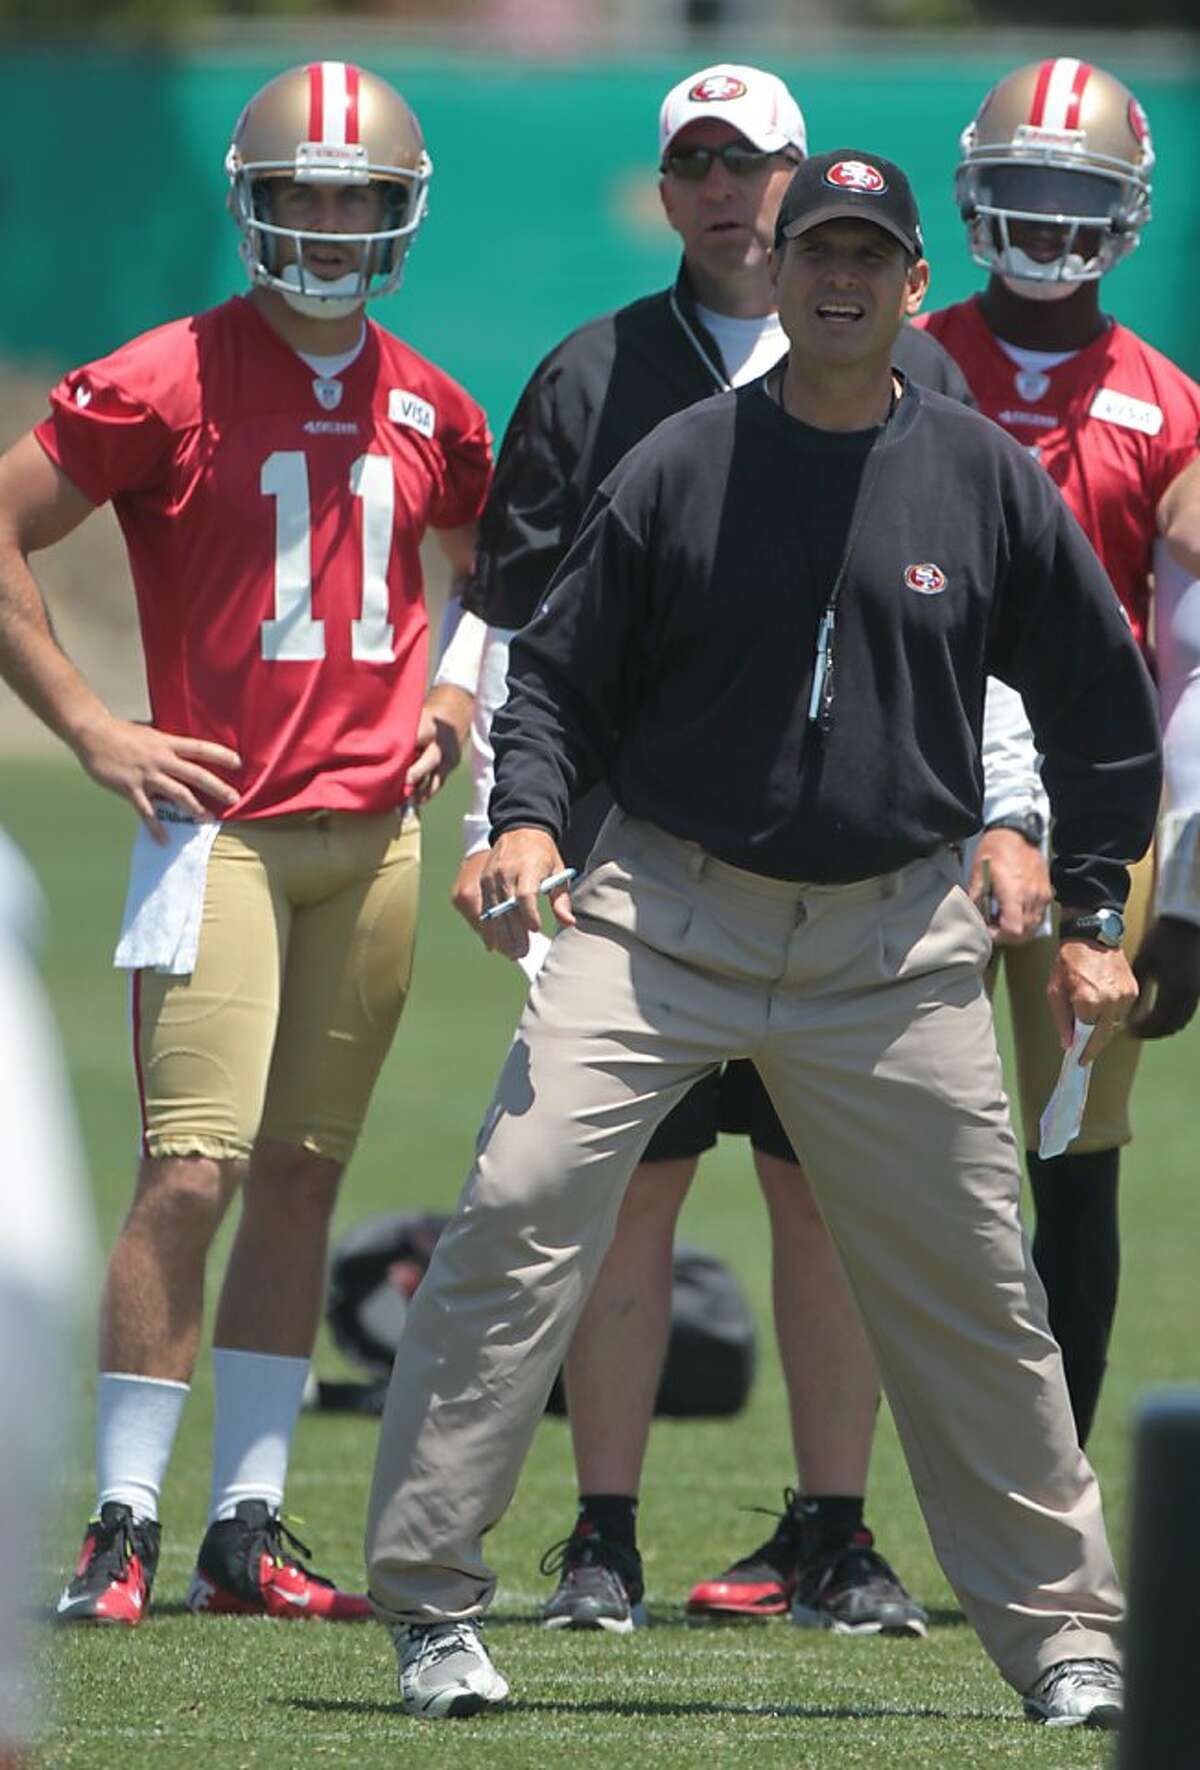 Head coach Jim Harbaugh watches a play during practice at the 49ers facility in Santa Clara, Calif. on Thursday, June 14, 2012.